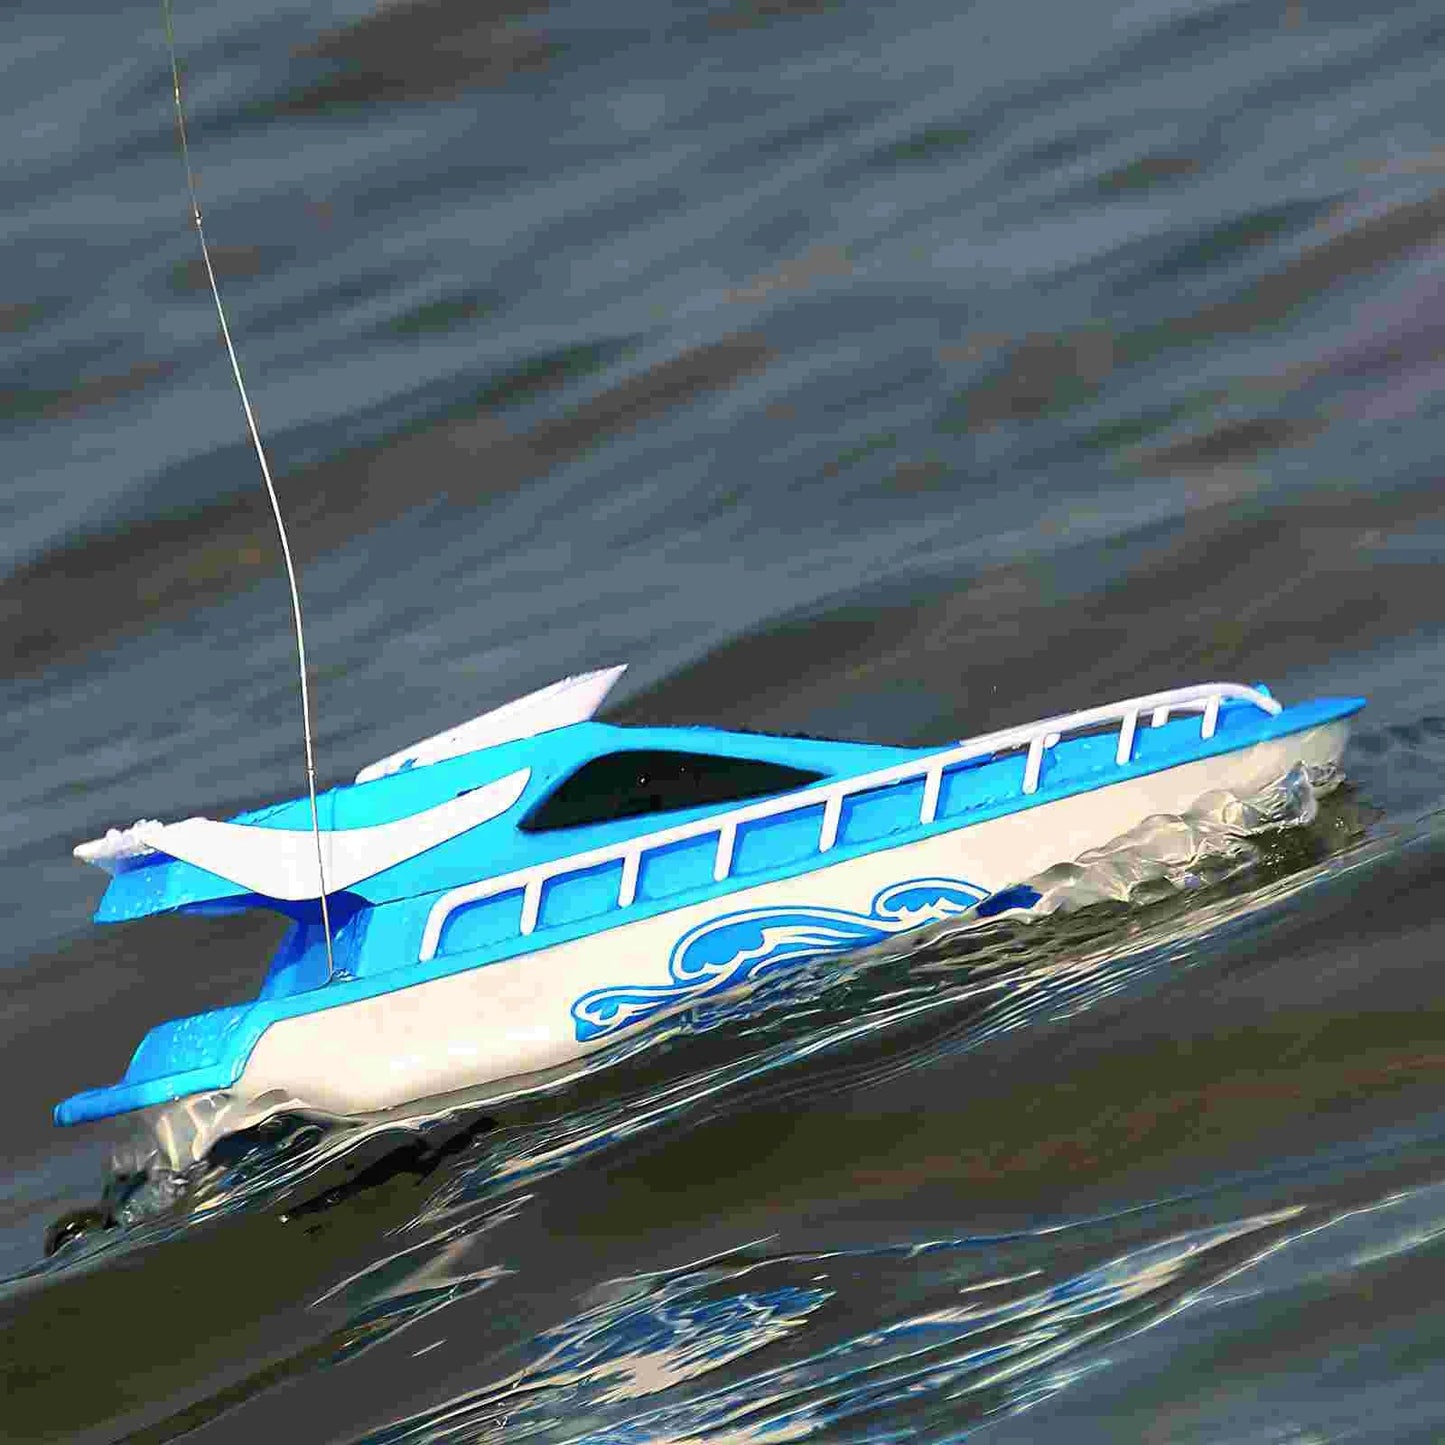 RC High-Speed Racing Boat with Remote Control - Blue